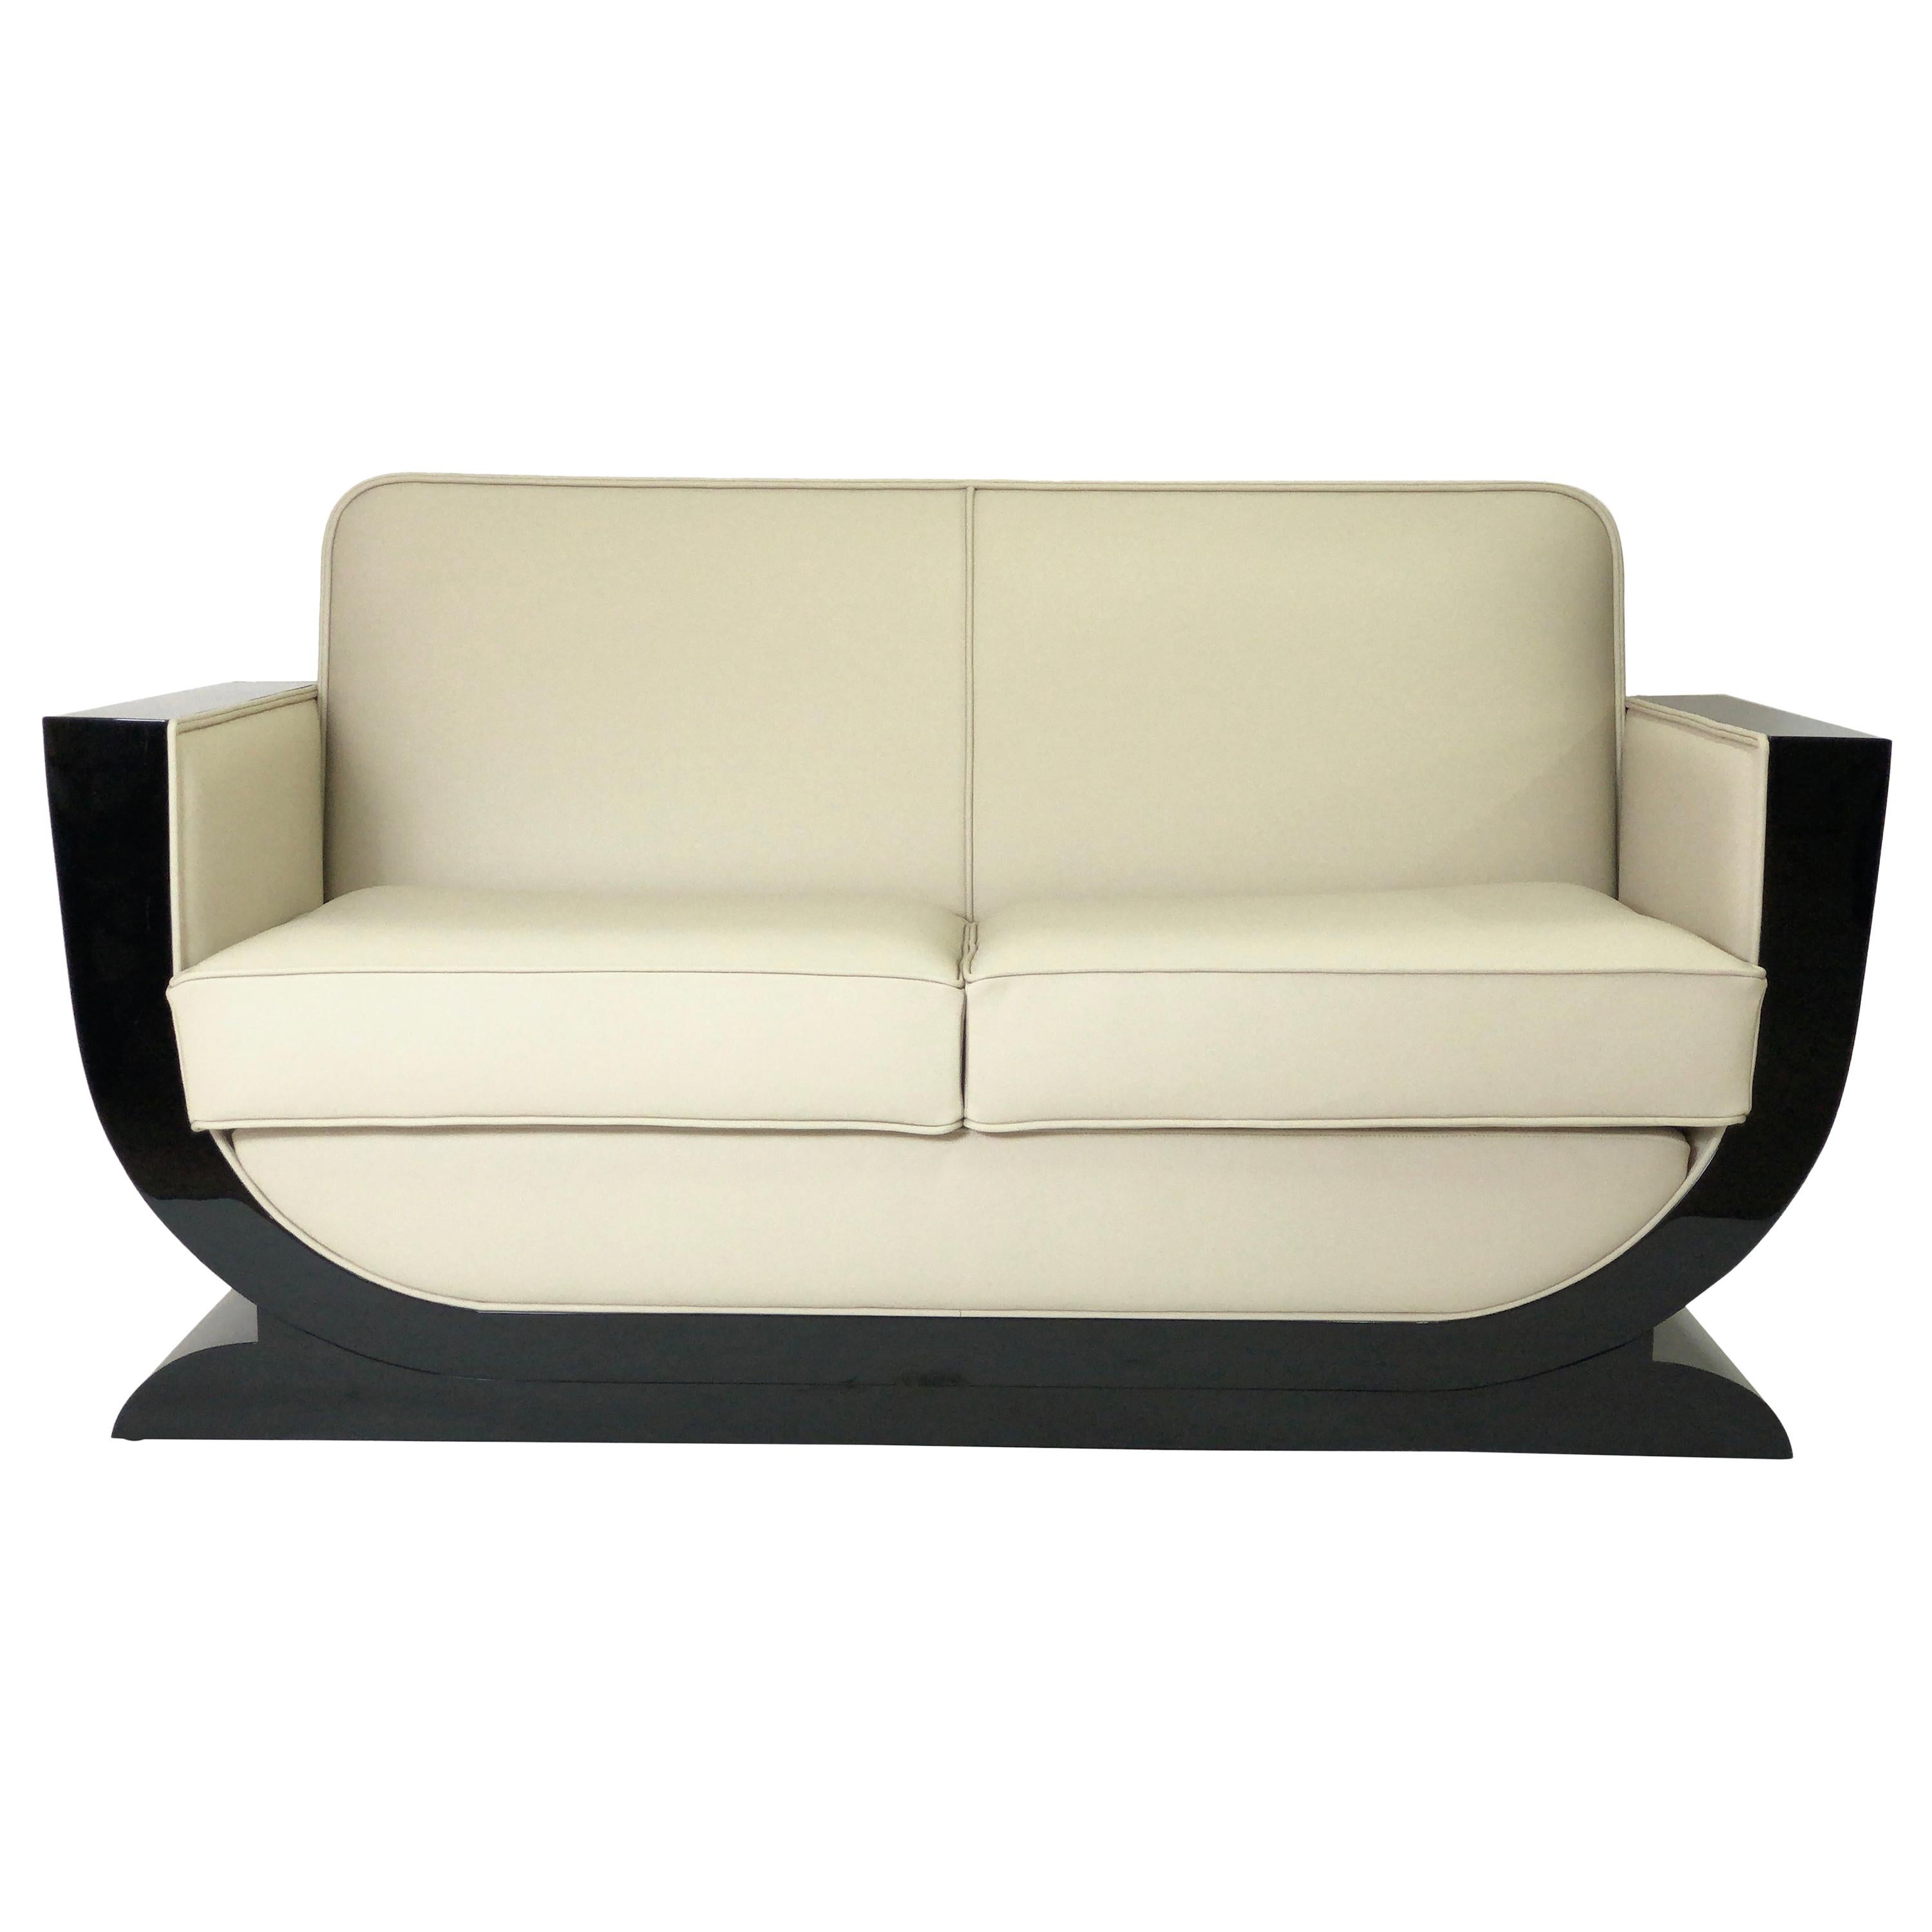 U-Shaped Black and White Art Deco Style Couch with Black Piano Lacquer For Sale